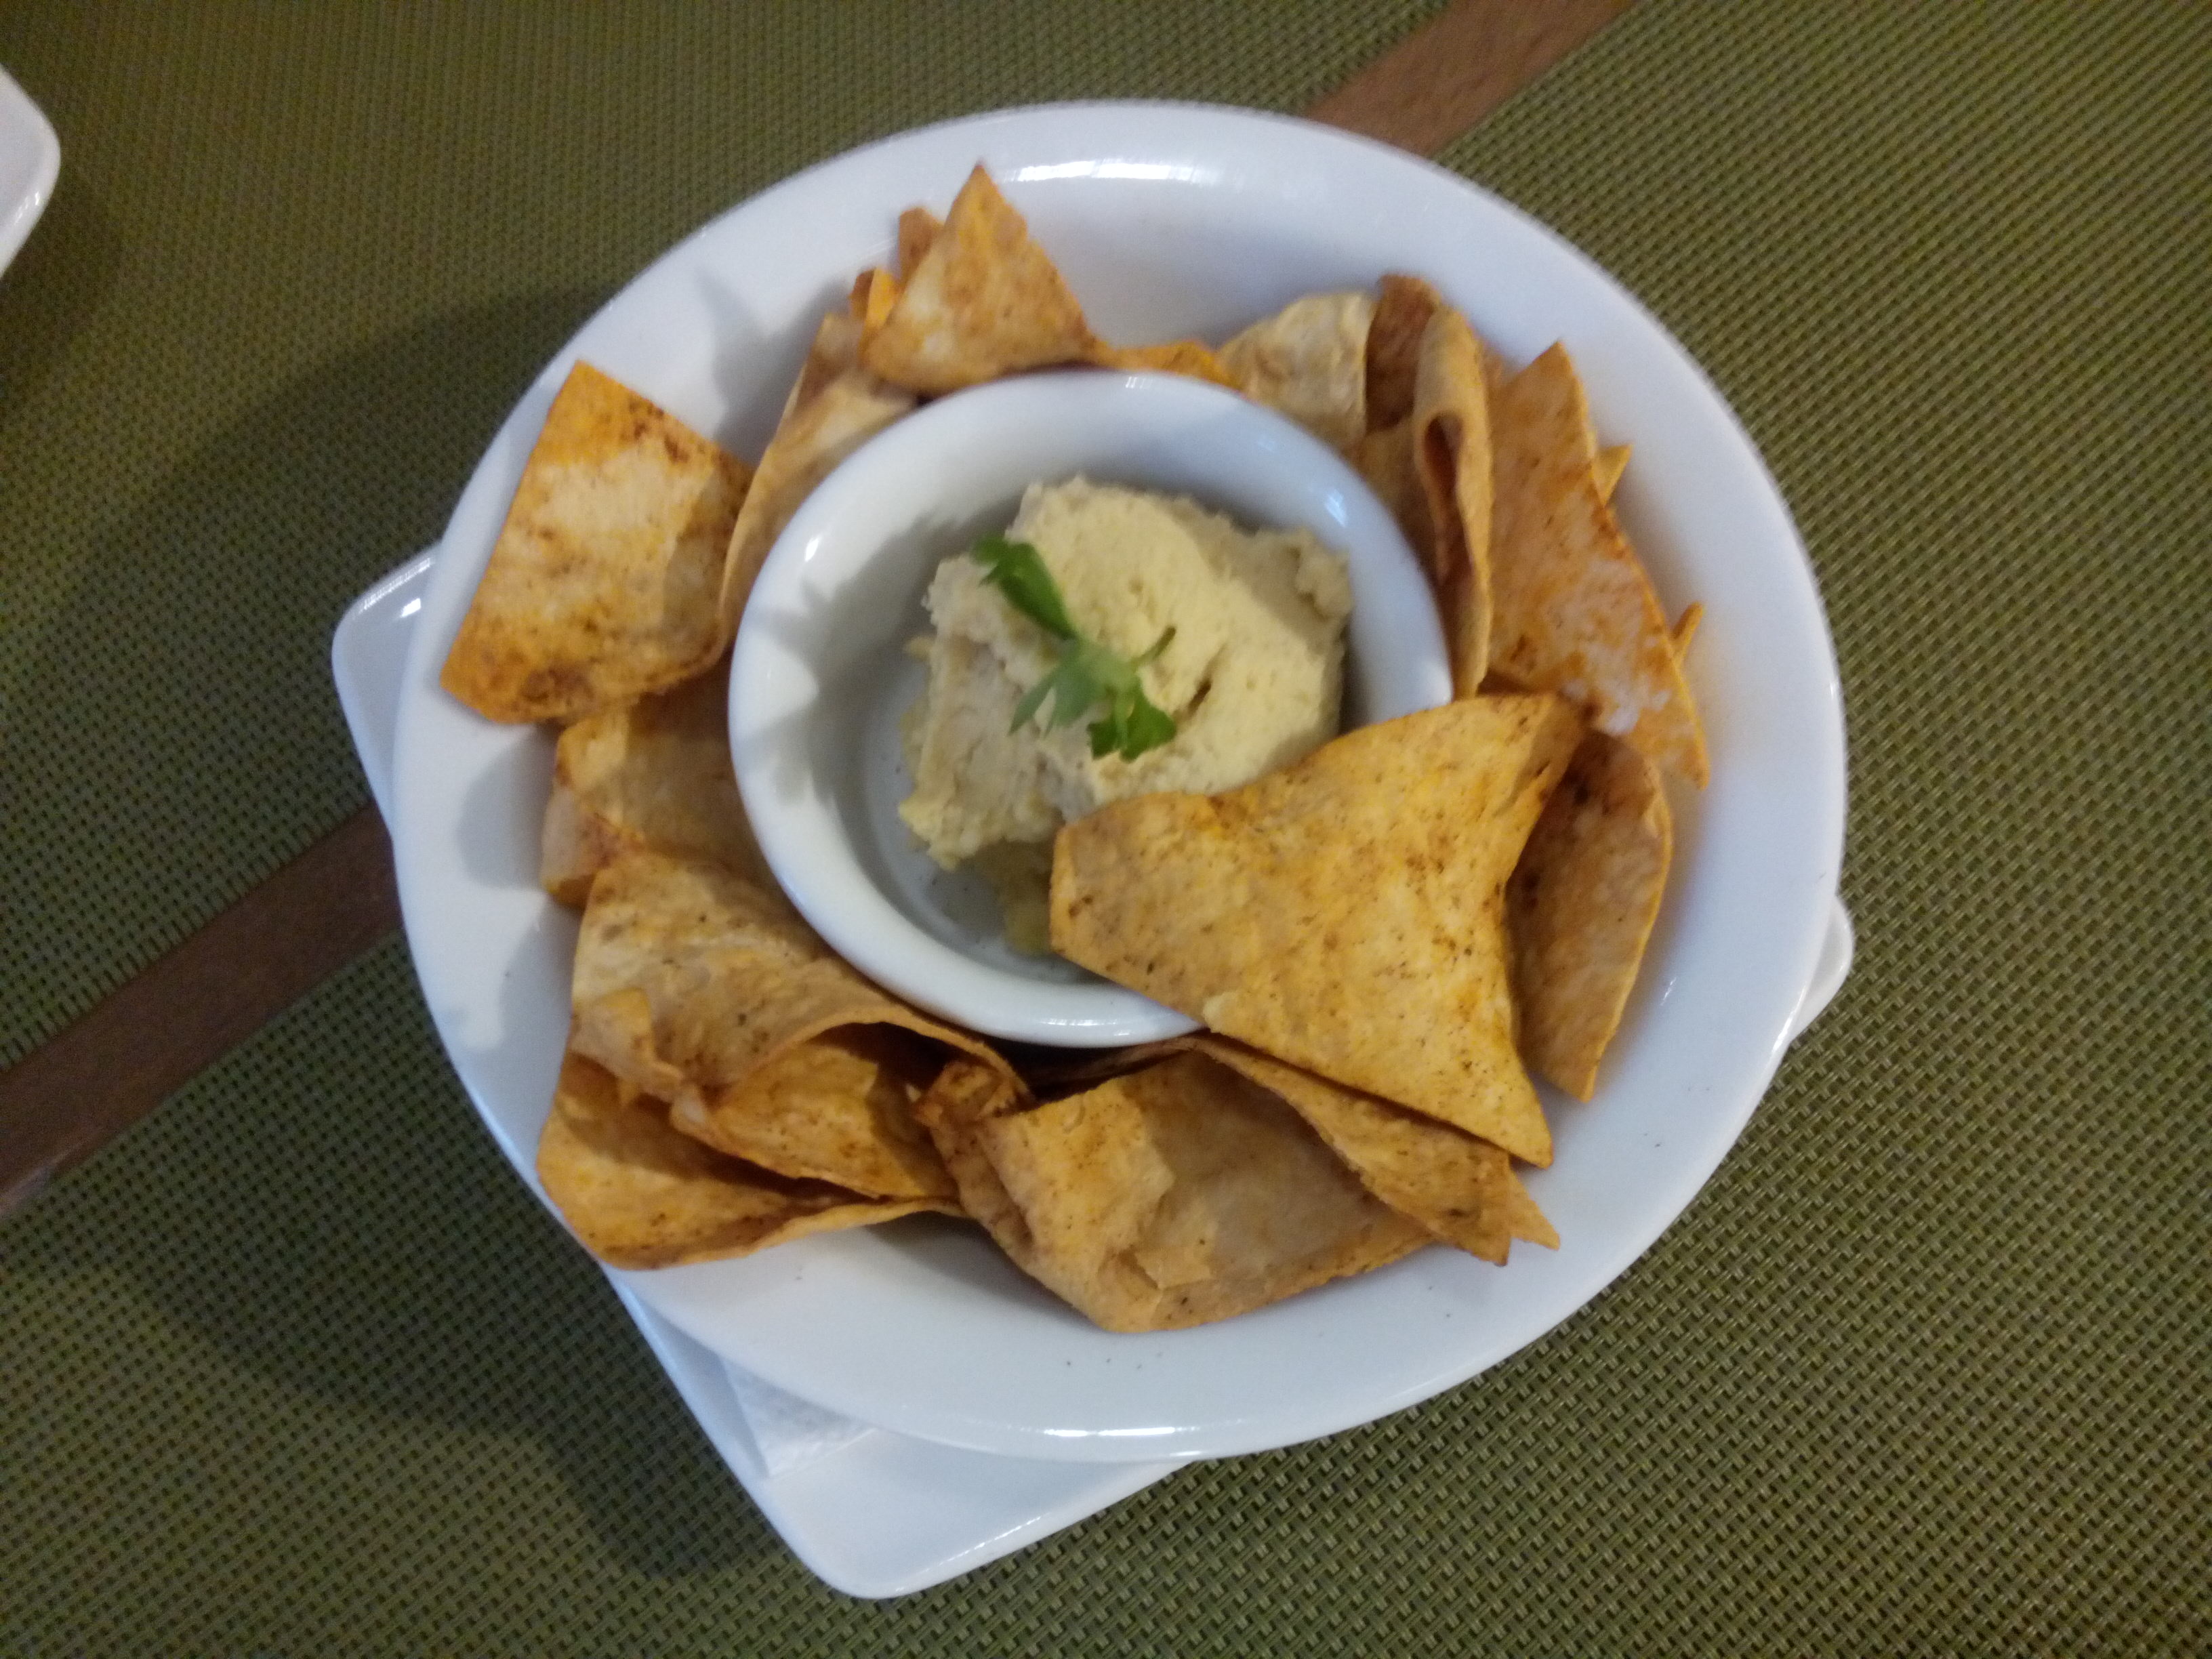 From above, a round dish with corn chips around the edge and a small ball of hummus in the middle